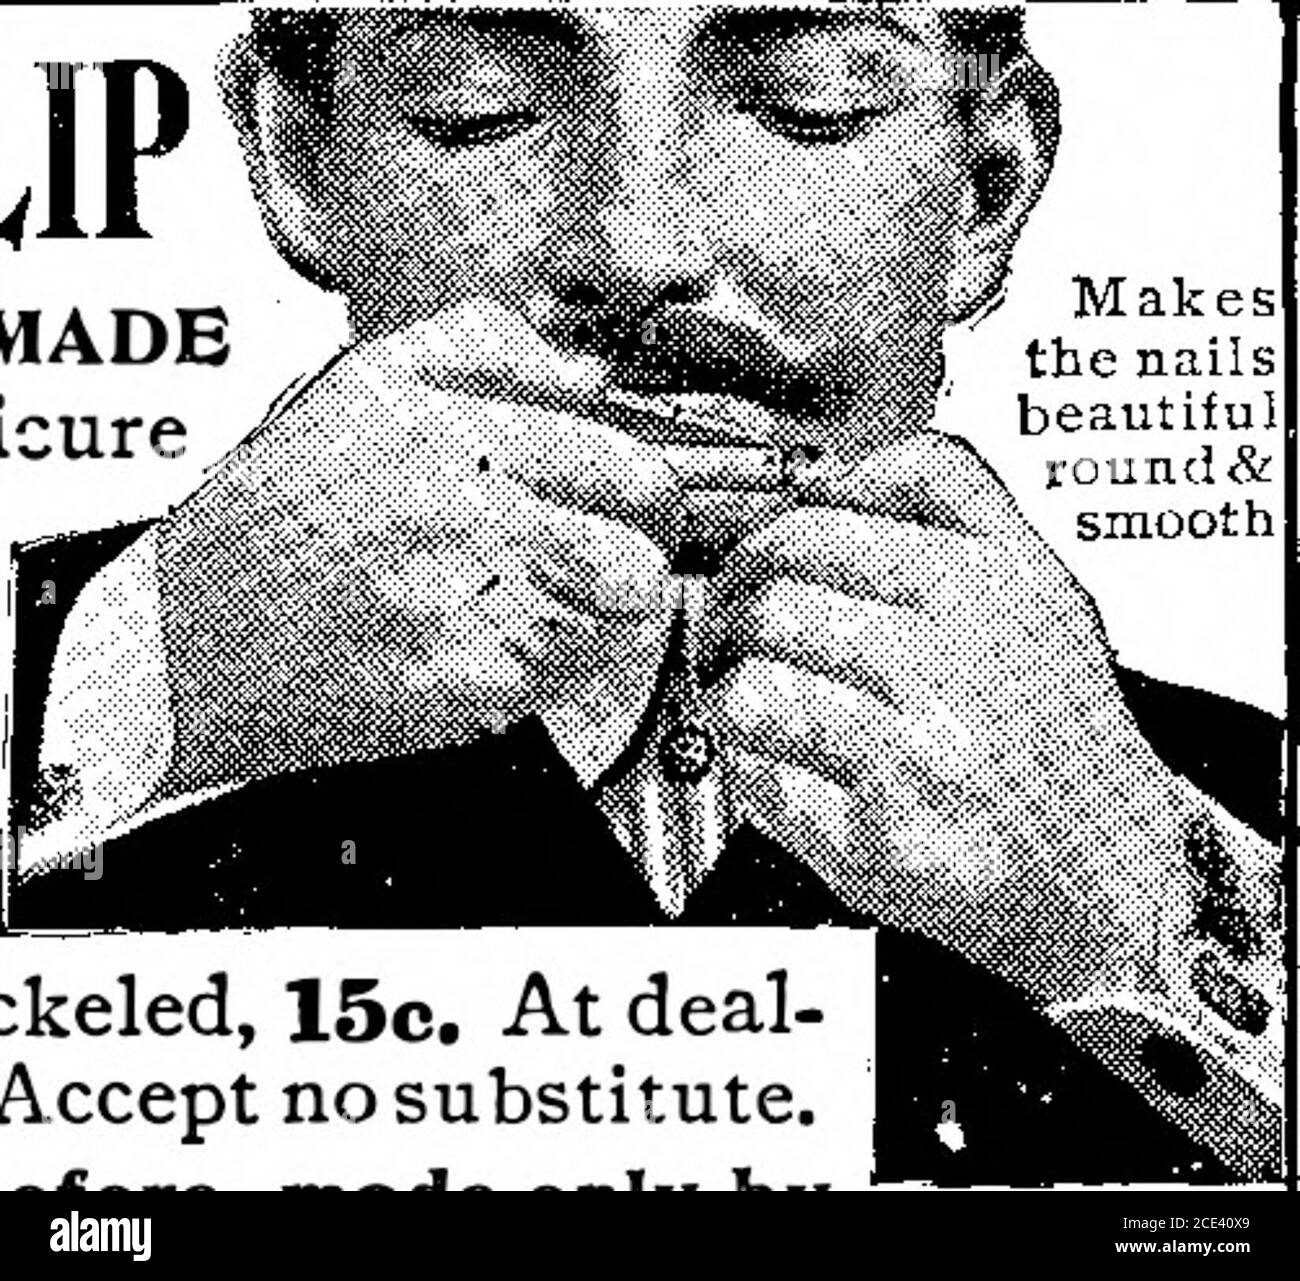 Scientific American Volume 92 Number 04 (January 1905) . KUMUP. BEST EVER  MADE A perfect manicure Quick, easy, simple and strong. The Original, made  in Germansilver, 25c. KIip=KIip Jr., nickeled, 15c.